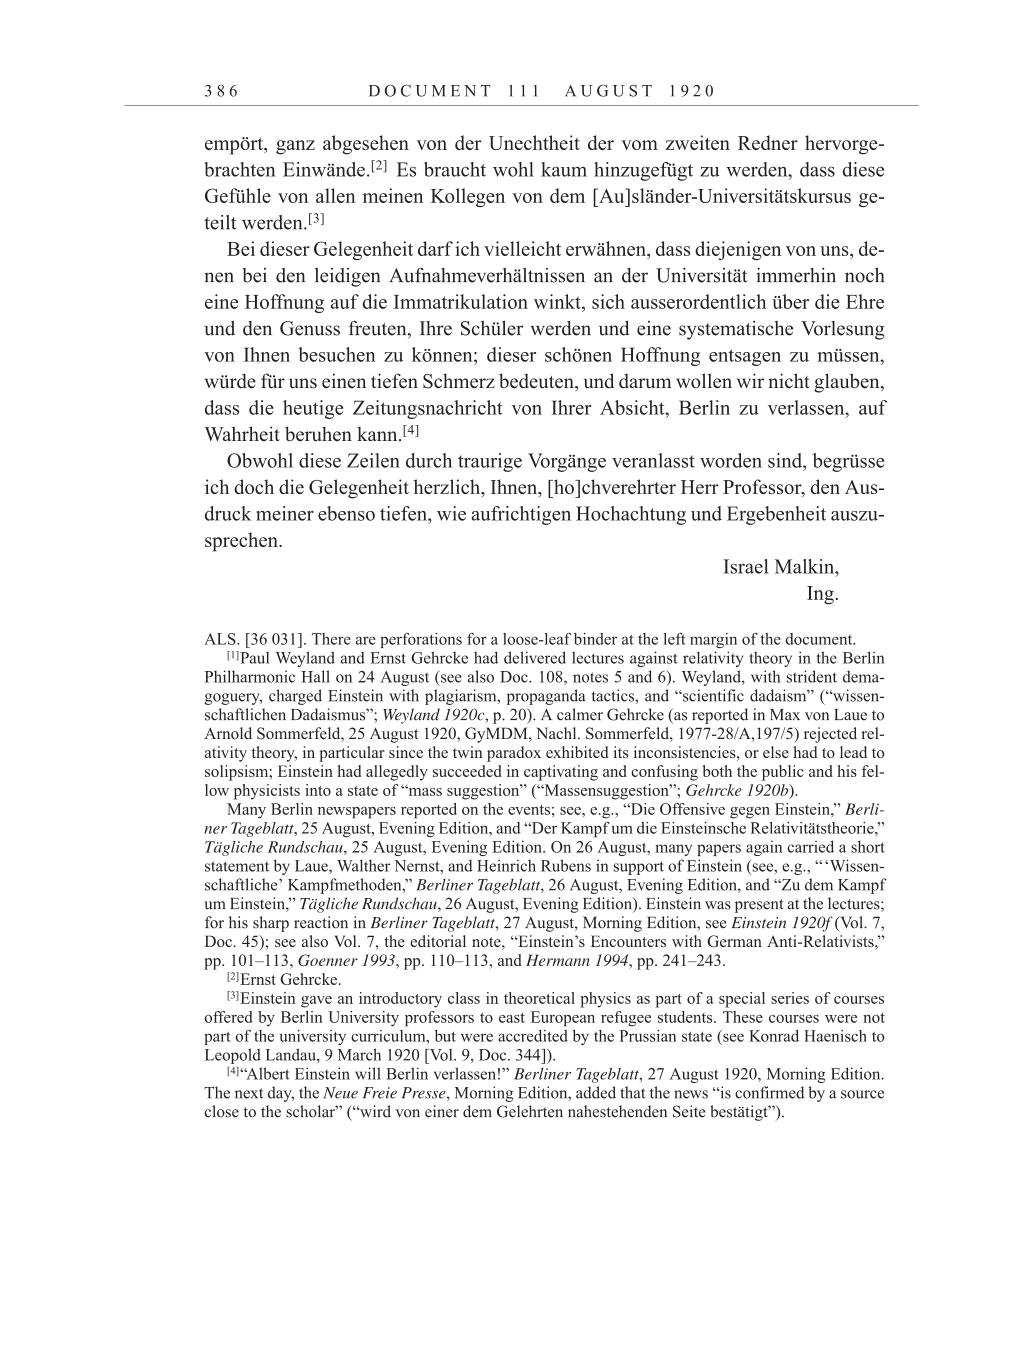 Volume 10: The Berlin Years: Correspondence May-December 1920 / Supplementary Correspondence 1909-1920 page 386